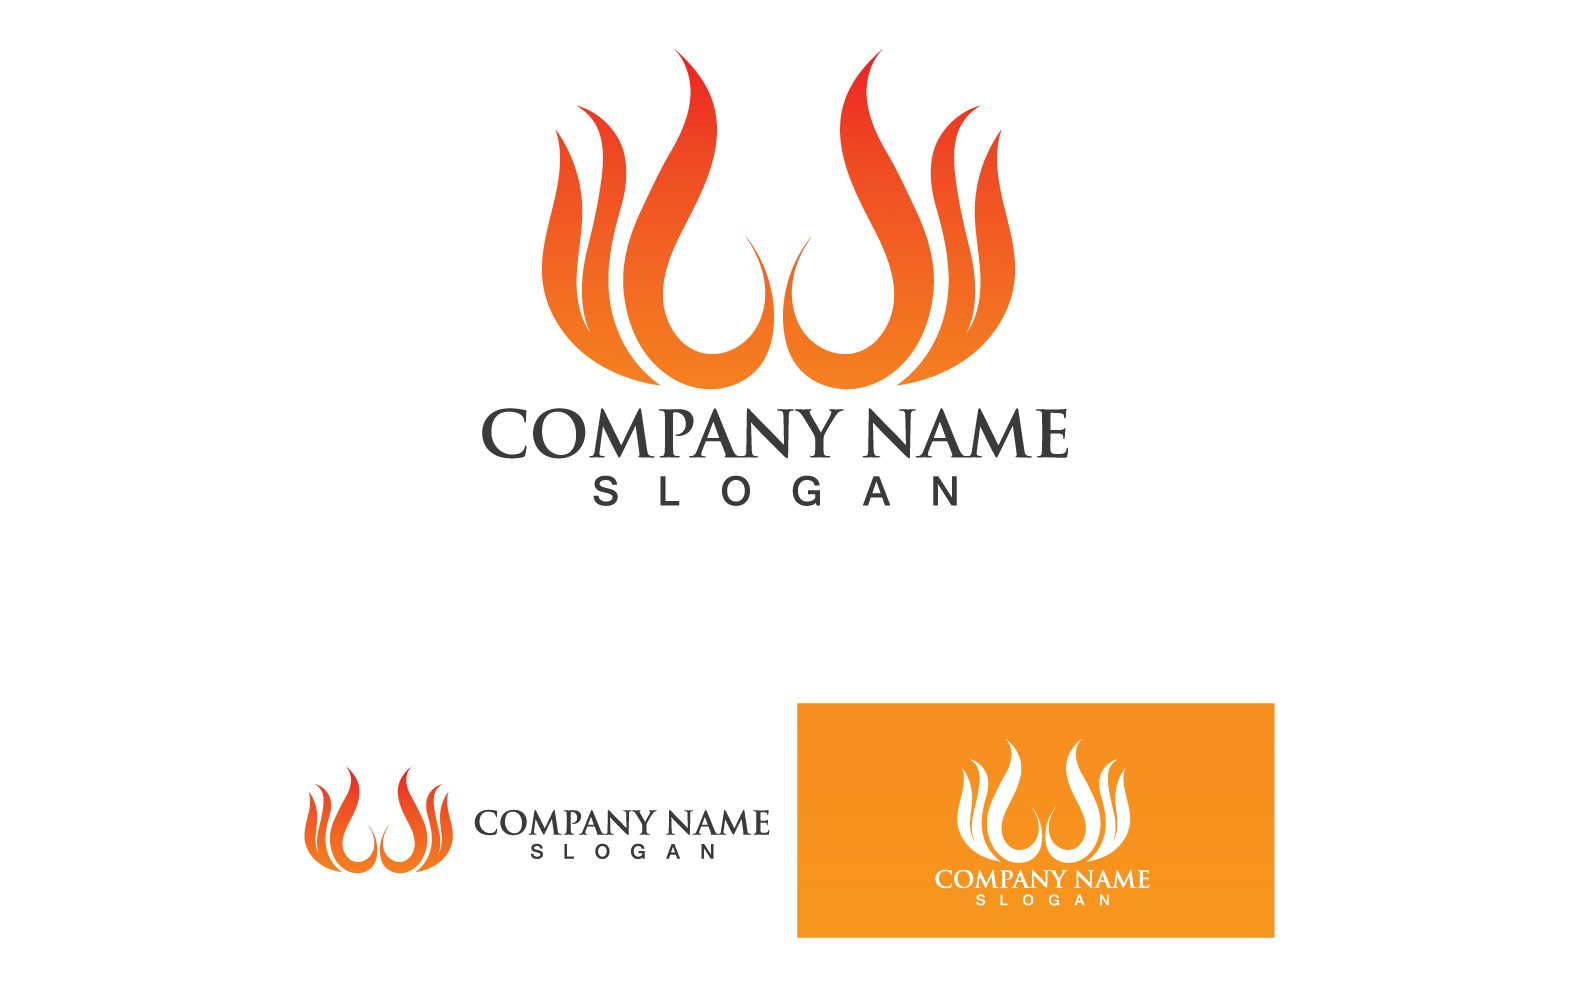 Wing Bird Business Logo Your Company Name V38